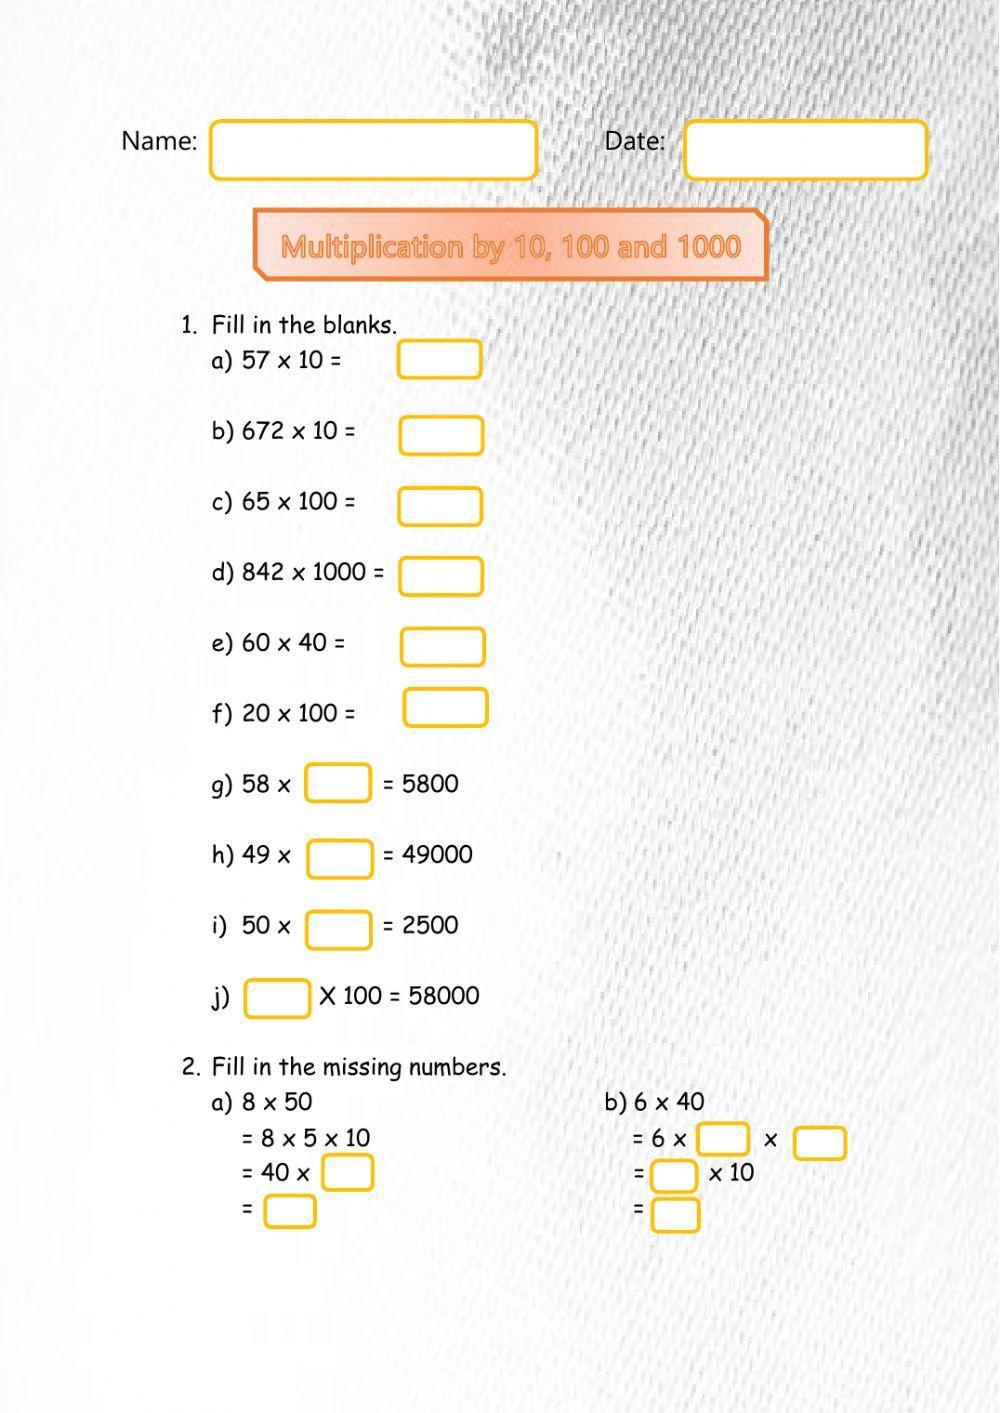 Multiplication by 10, 100 and 1000